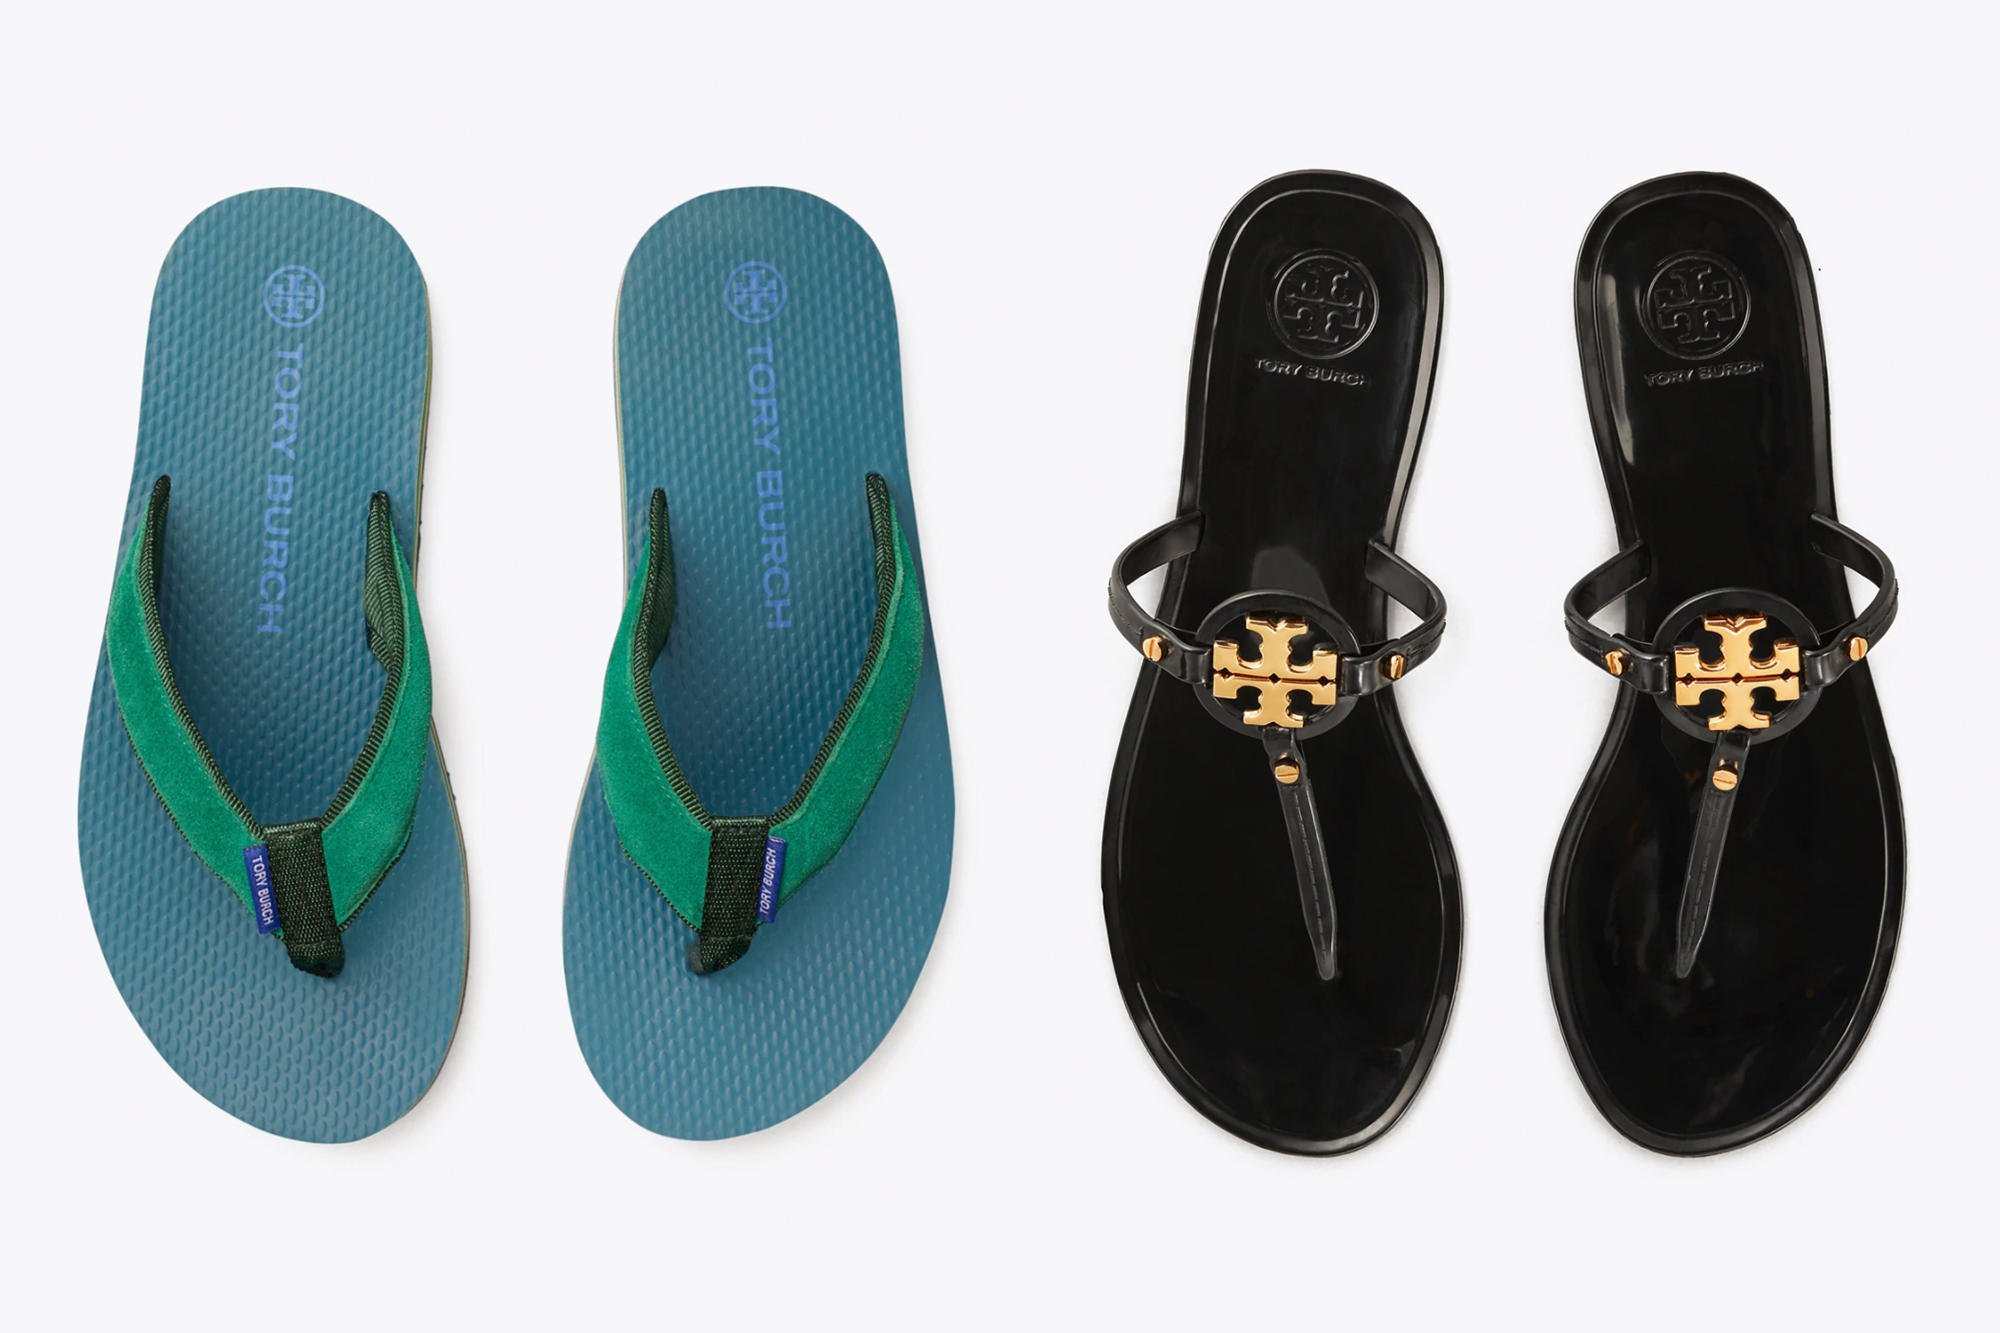 Tory Burch Has So Many Sandals and Shoes on Serious Sale